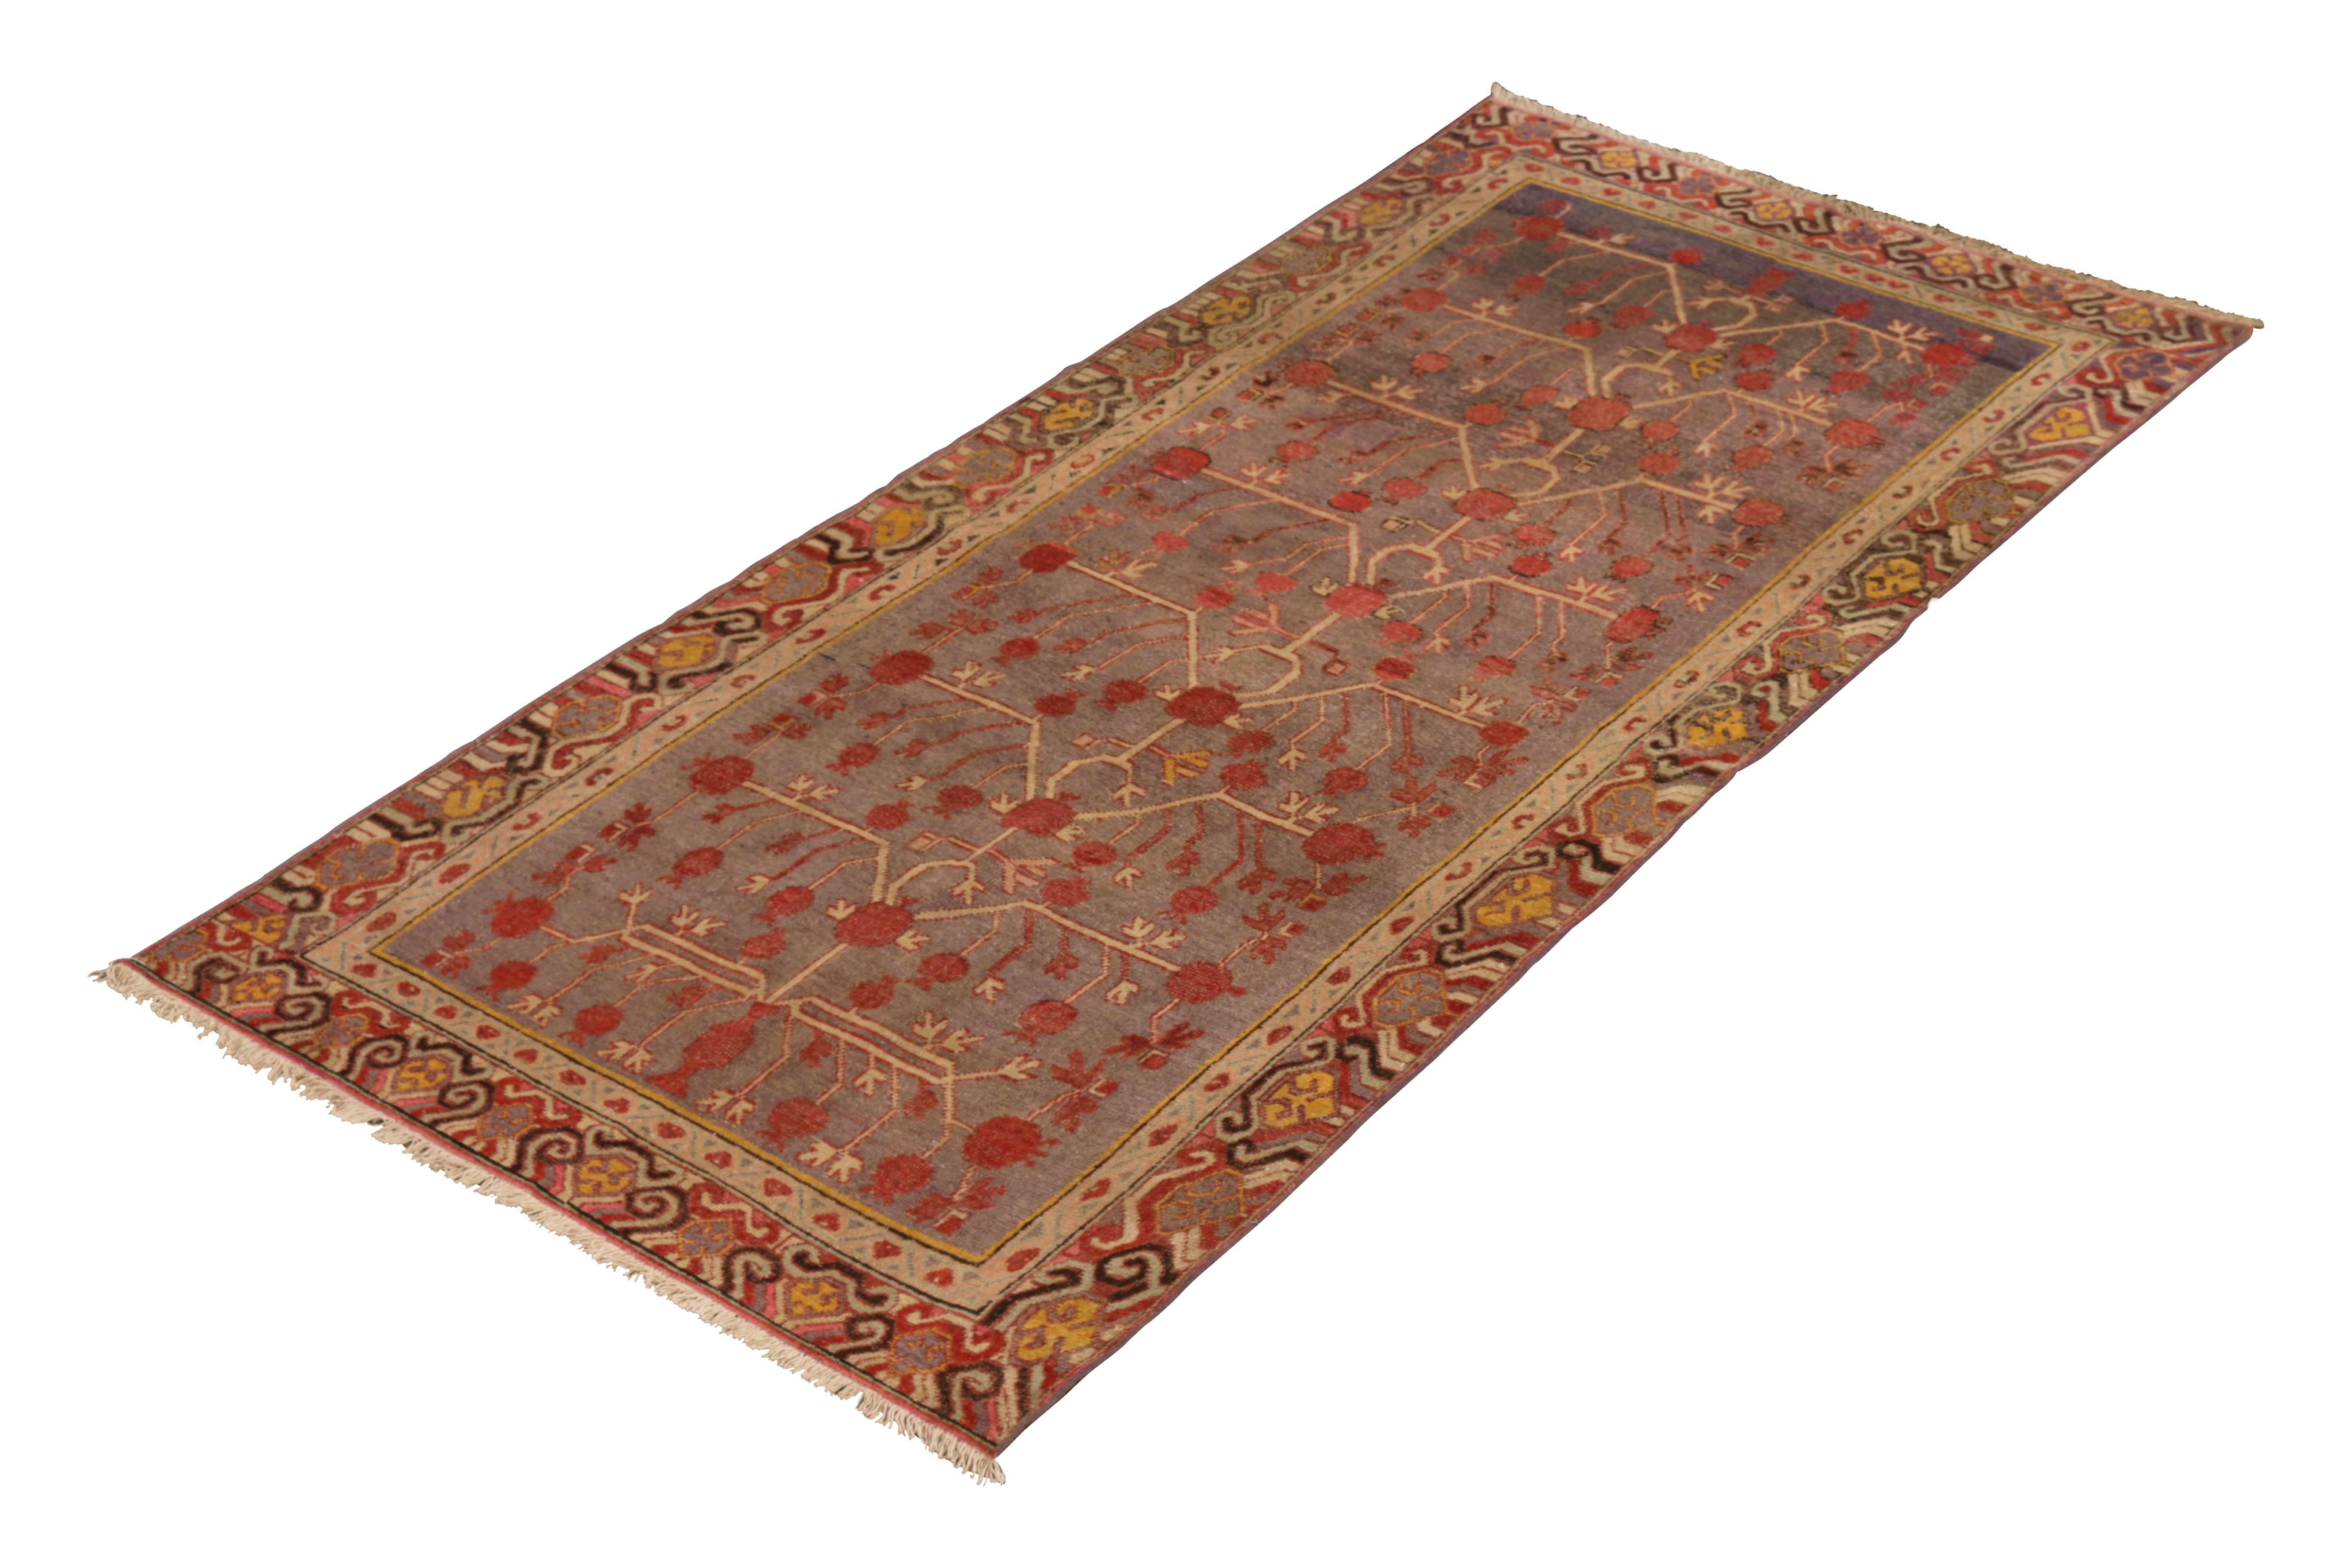 Hand knotted in wool originating from East Turkestan circa 1890-1900, this antique rug connotes a classic Khotan rug design with a classic approach to transitional colorway celebrated in this oriental rug family. Further enjoying the classic